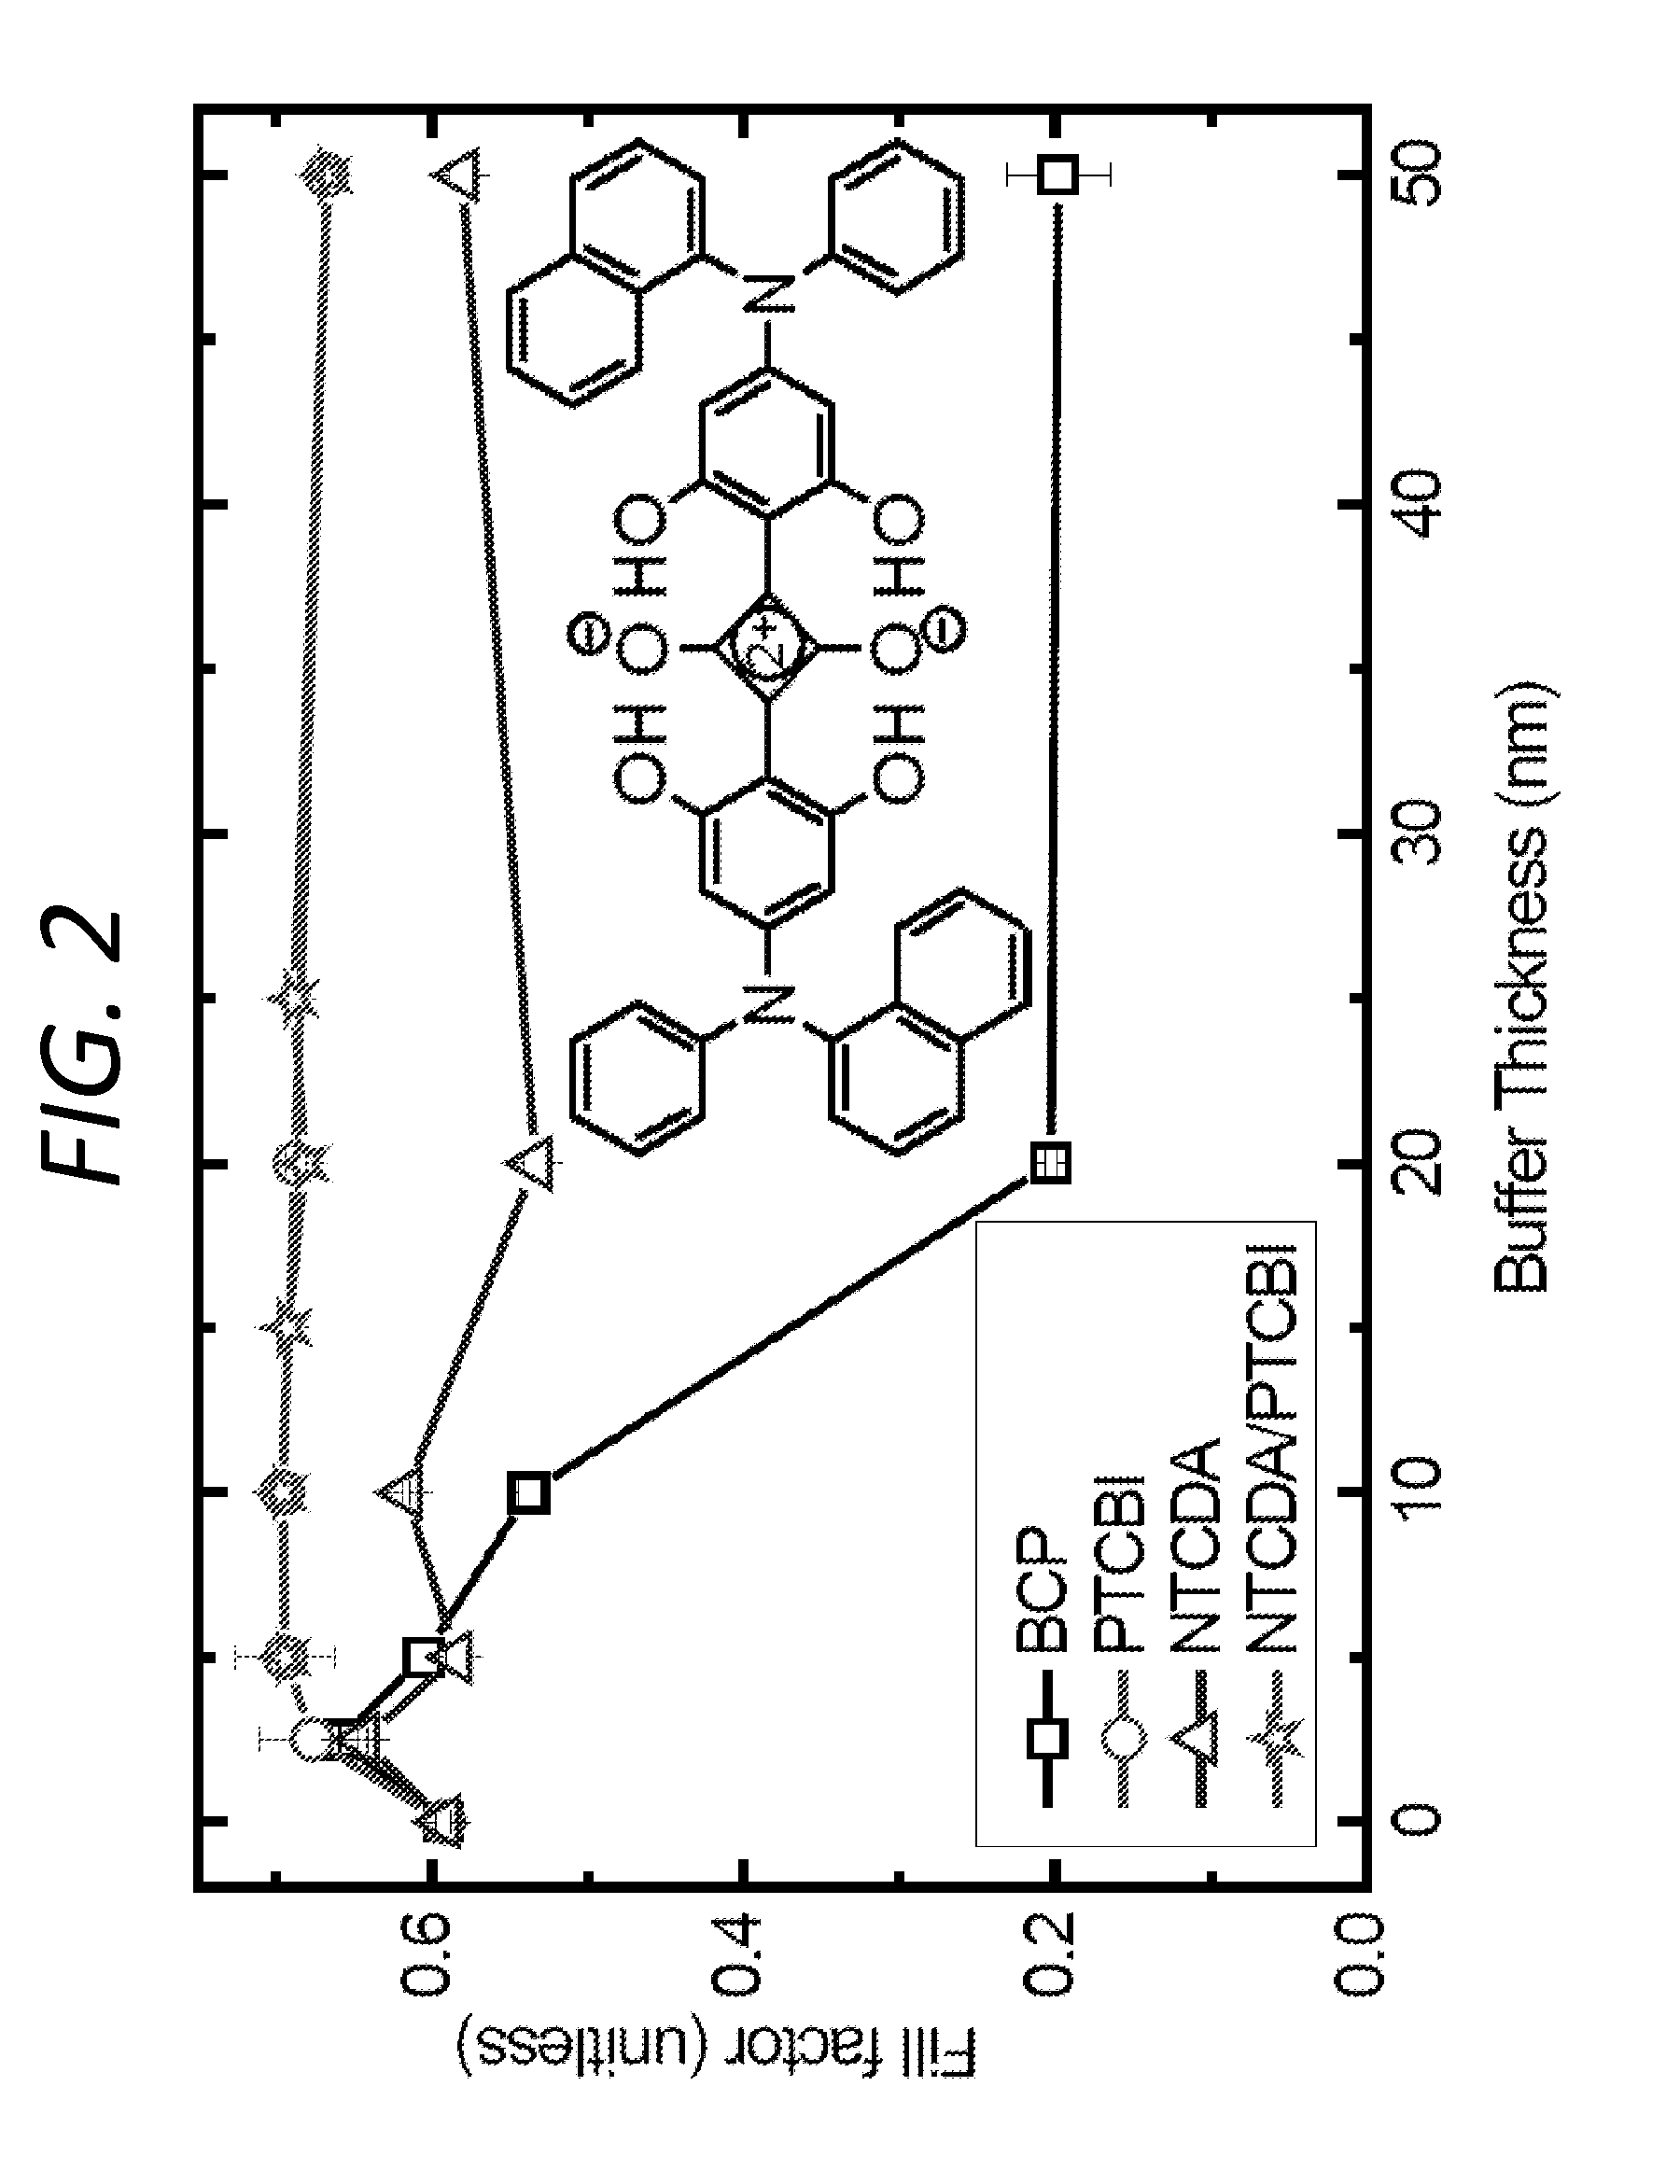 Organic photovoltaic cell incorporating electron conducting exciton blocking layers